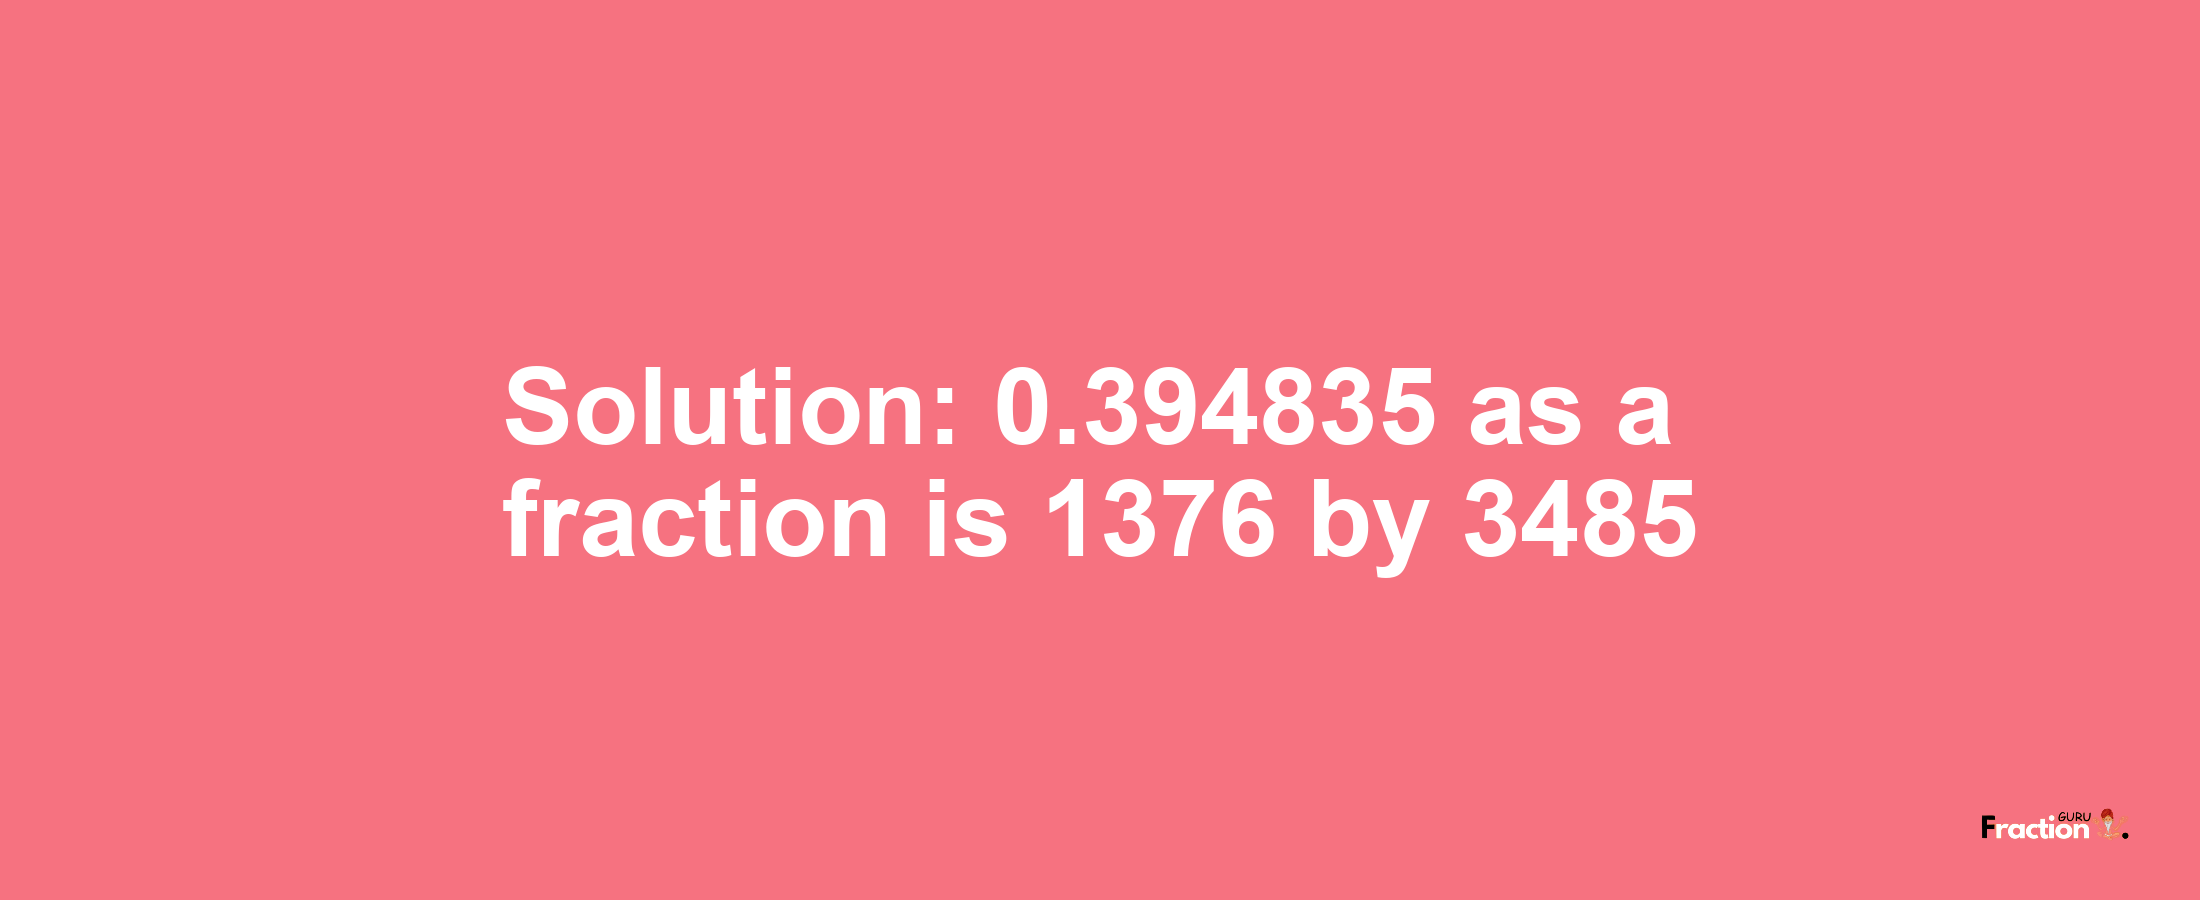 Solution:0.394835 as a fraction is 1376/3485